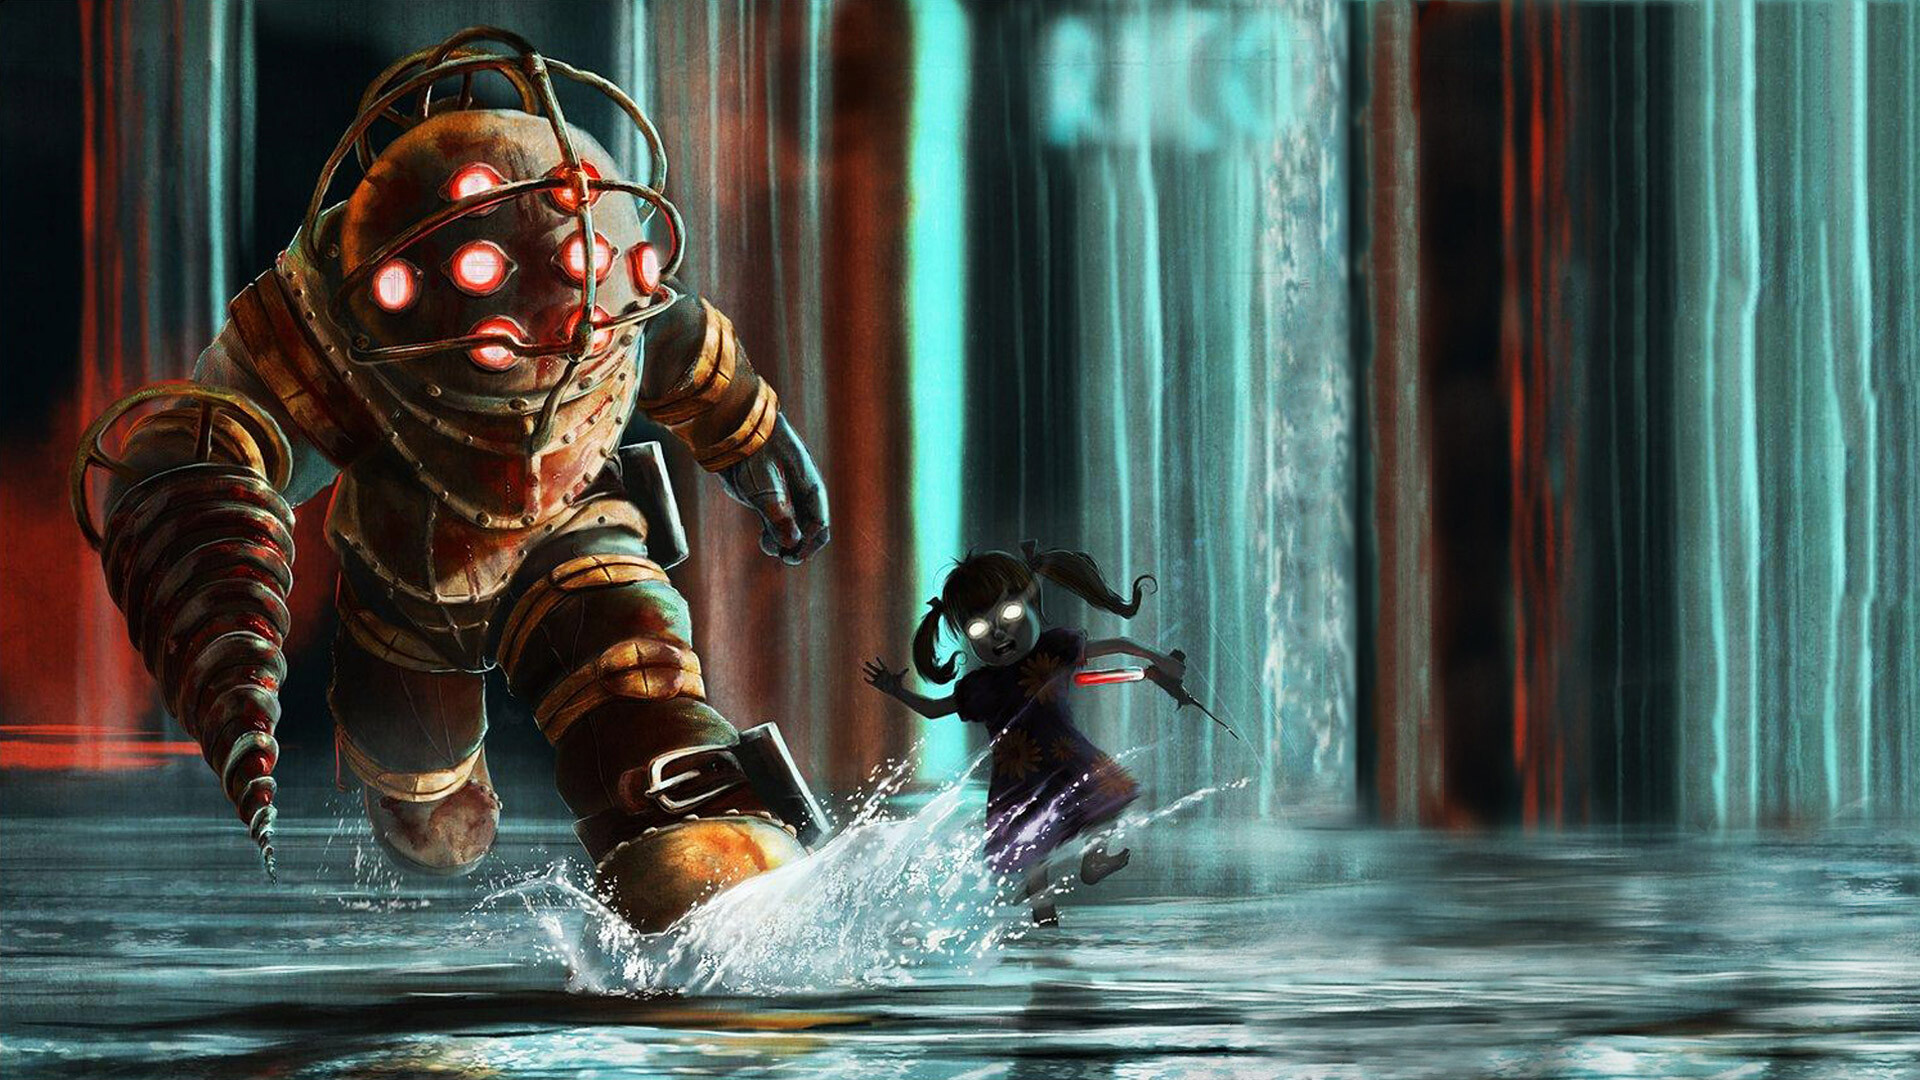 BioShock: The game takes place in the dystopian underwater city of Rapture. 1920x1080 Full HD Wallpaper.